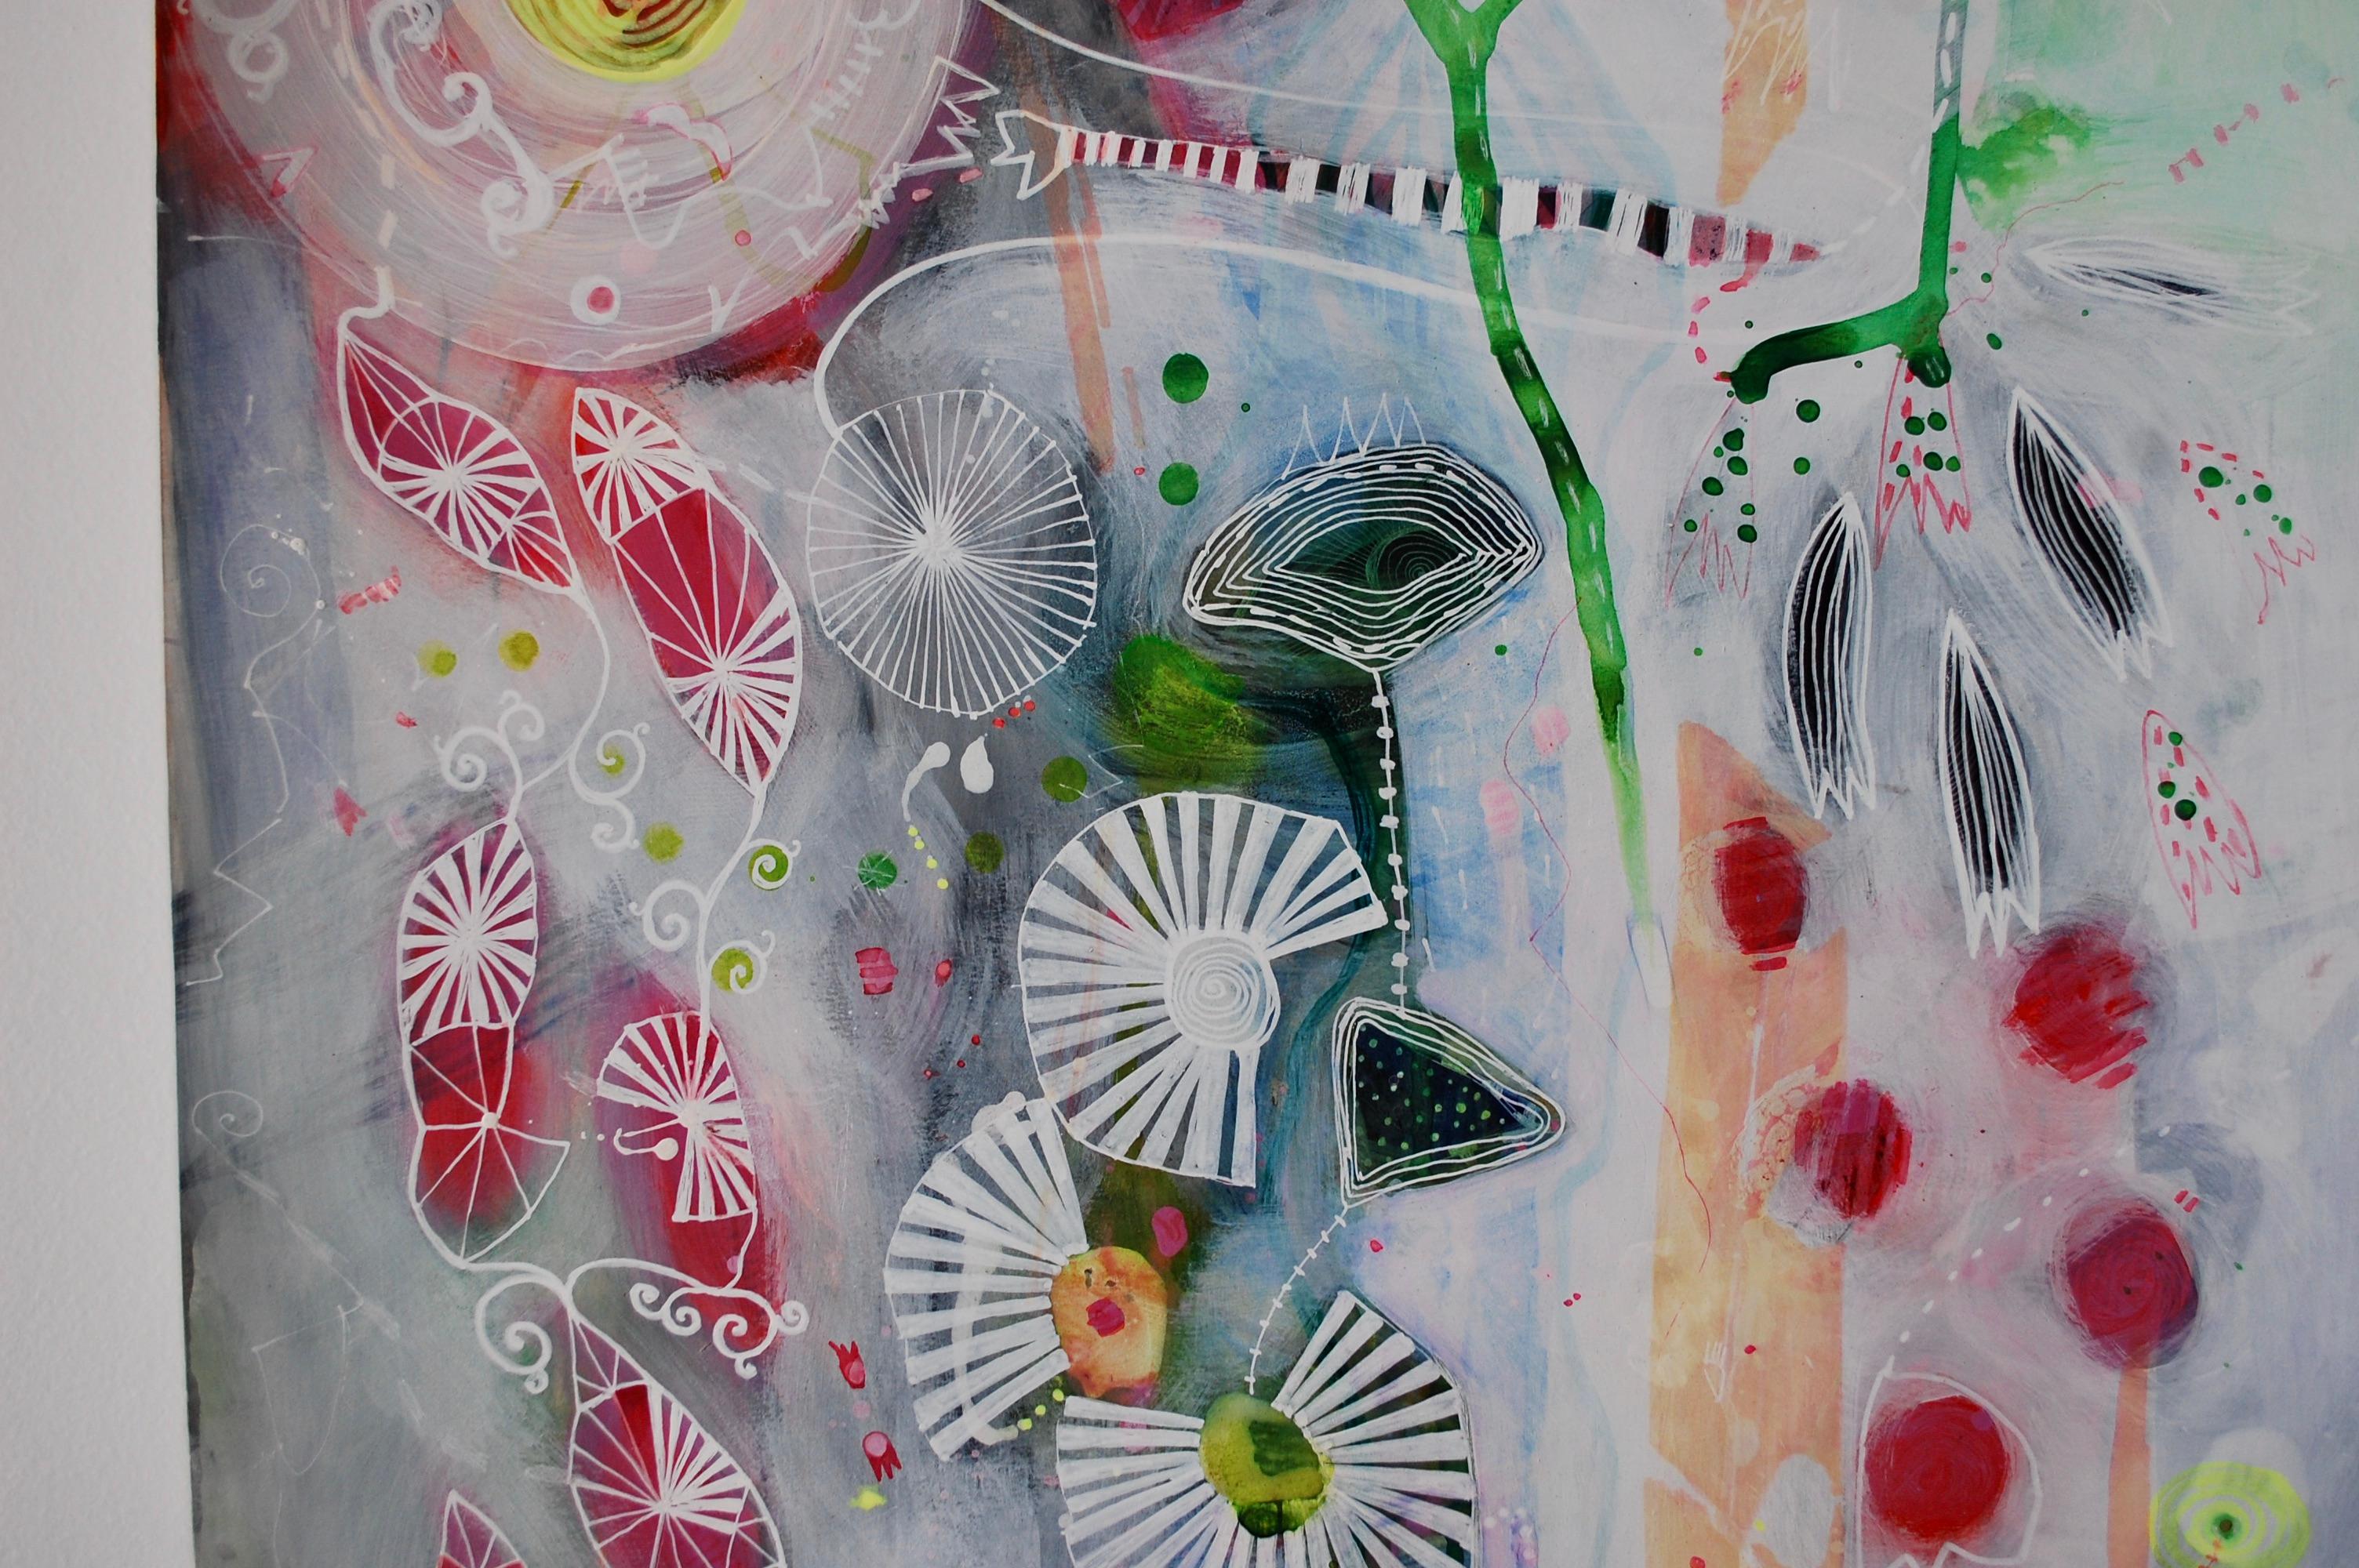 Wild Strawberries Mixed Media on Paper - Abstract Expressionist Painting by Malgosia Kiernozycka